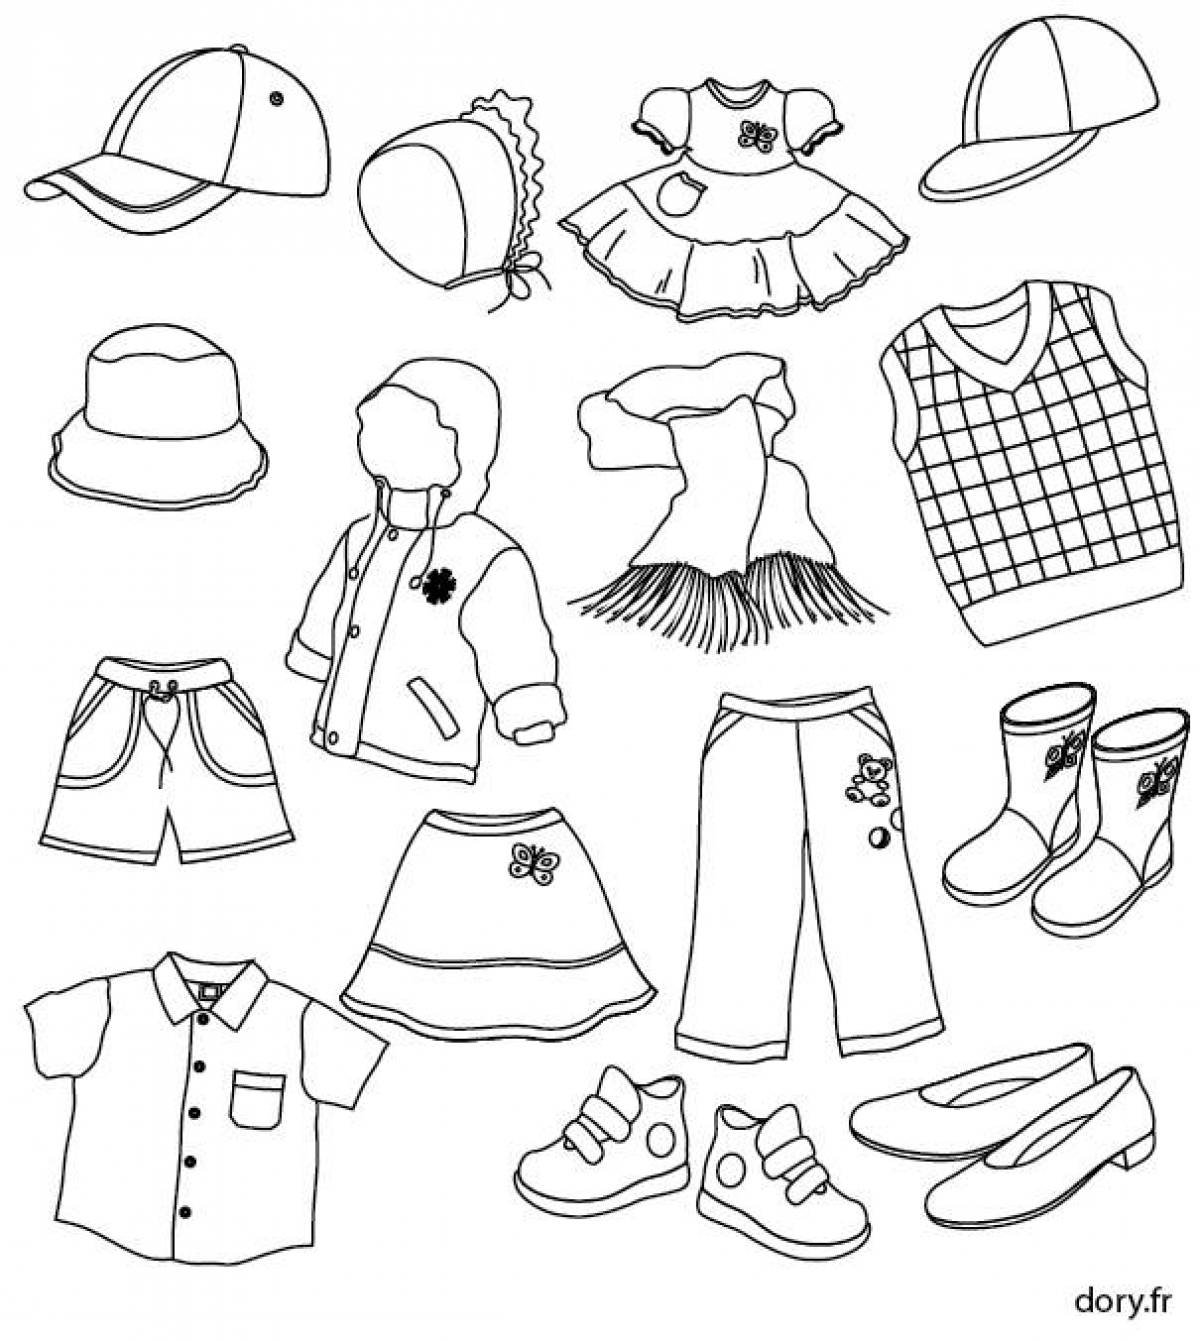 Playful coloring of clothes for children 3-4 years old